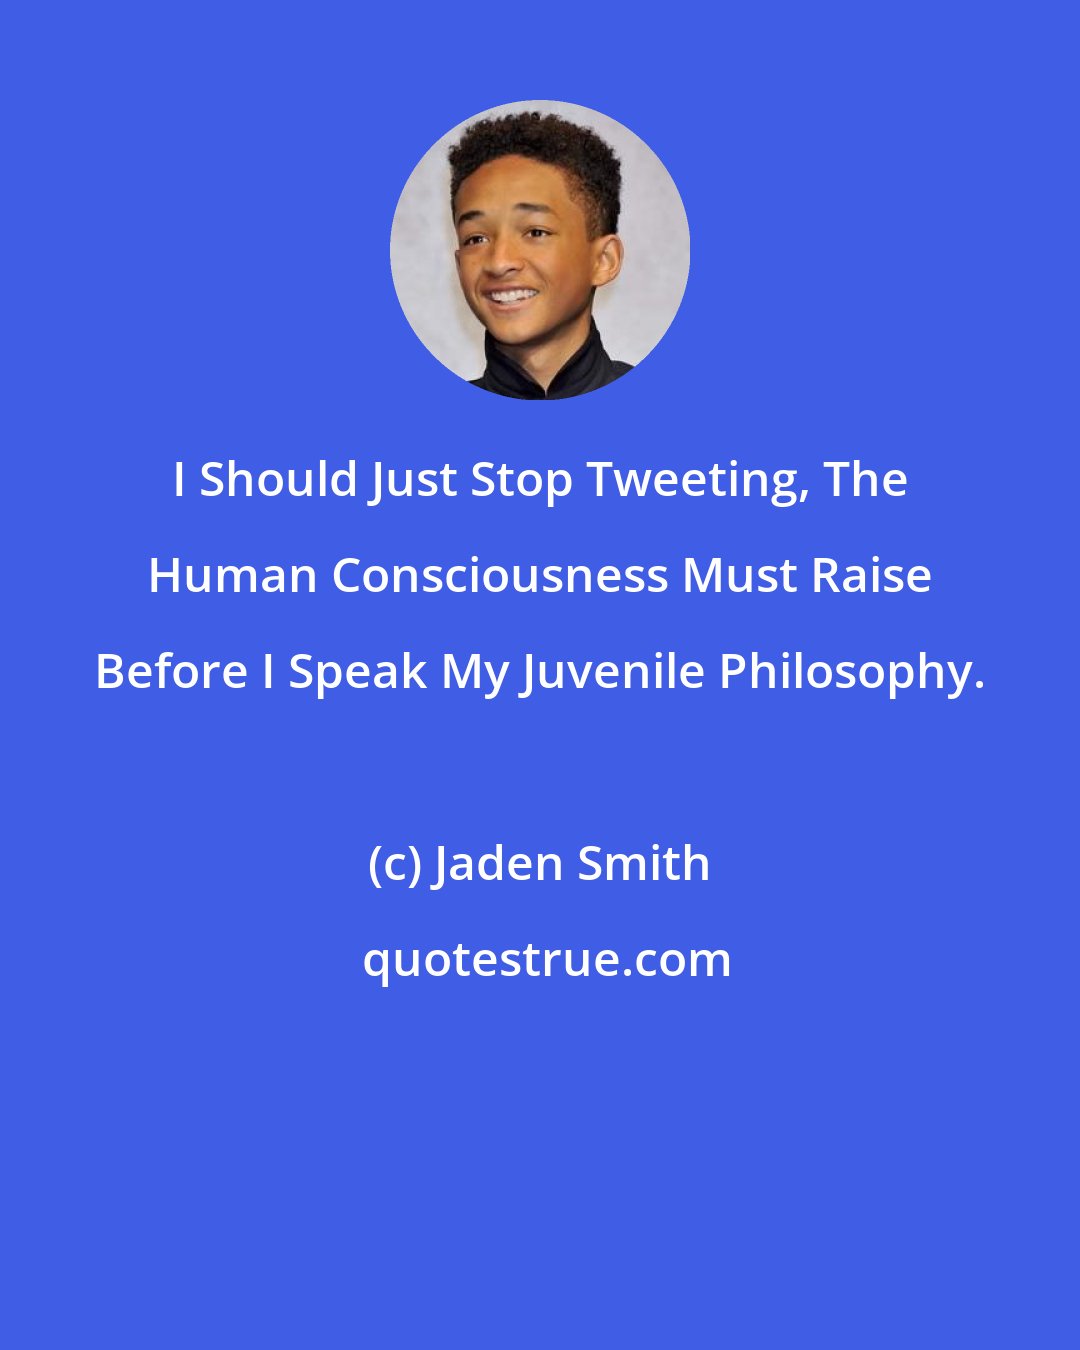 Jaden Smith: I Should Just Stop Tweeting, The Human Consciousness Must Raise Before I Speak My Juvenile Philosophy.